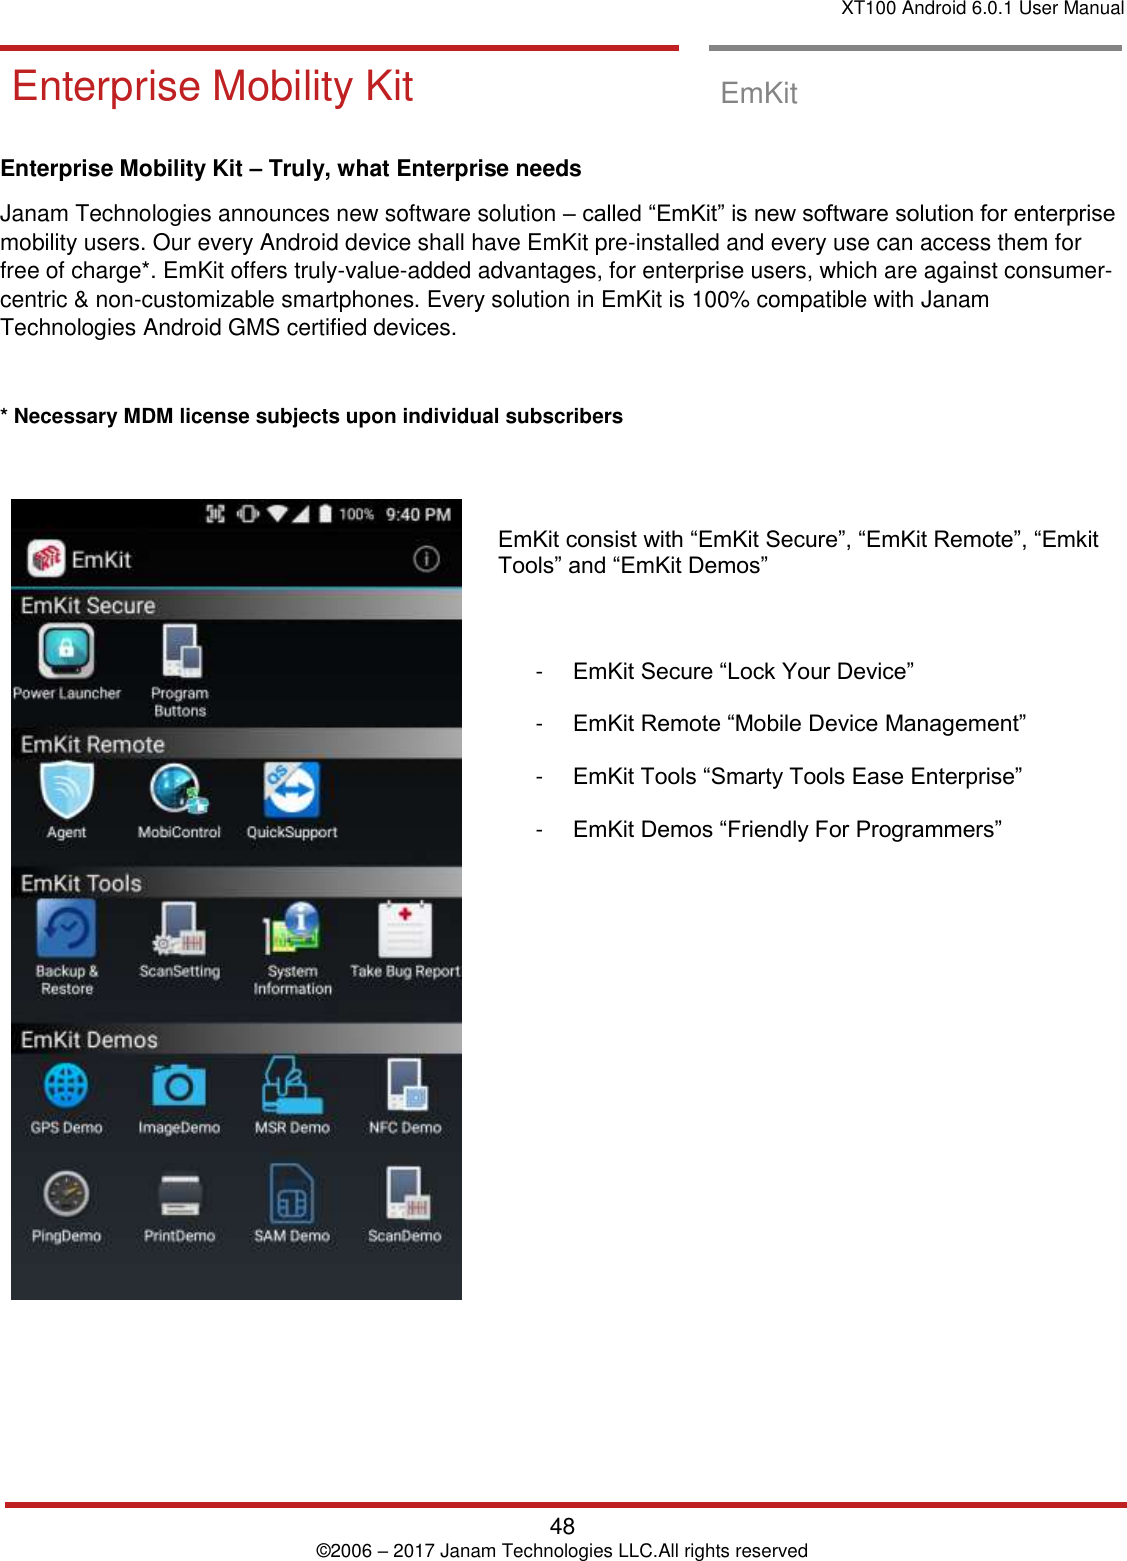 XT100 Android 6.0.1 User Manual   48 © 2006 – 2017 Janam Technologies LLC.All rights reserved  EmKit Enterprise Mobility Kit  EmKit  Enterprise Mobility Kit – Truly, what Enterprise needs Janam Technologies announces new software solution – called “EmKit” is new software solution for enterprise mobility users. Our every Android device shall have EmKit pre-installed and every use can access them for free of charge*. EmKit offers truly-value-added advantages, for enterprise users, which are against consumer-centric &amp; non-customizable smartphones. Every solution in EmKit is 100% compatible with Janam Technologies Android GMS certified devices.  * Necessary MDM license subjects upon individual subscribers        EmKit consist with “EmKit Secure”, “EmKit Remote”, “Emkit Tools” and “EmKit Demos”    -  EmKit Secure “Lock Your Device”  -  EmKit Remote “Mobile Device Management”  -  EmKit Tools “Smarty Tools Ease Enterprise”  -  EmKit Demos “Friendly For Programmers”                   